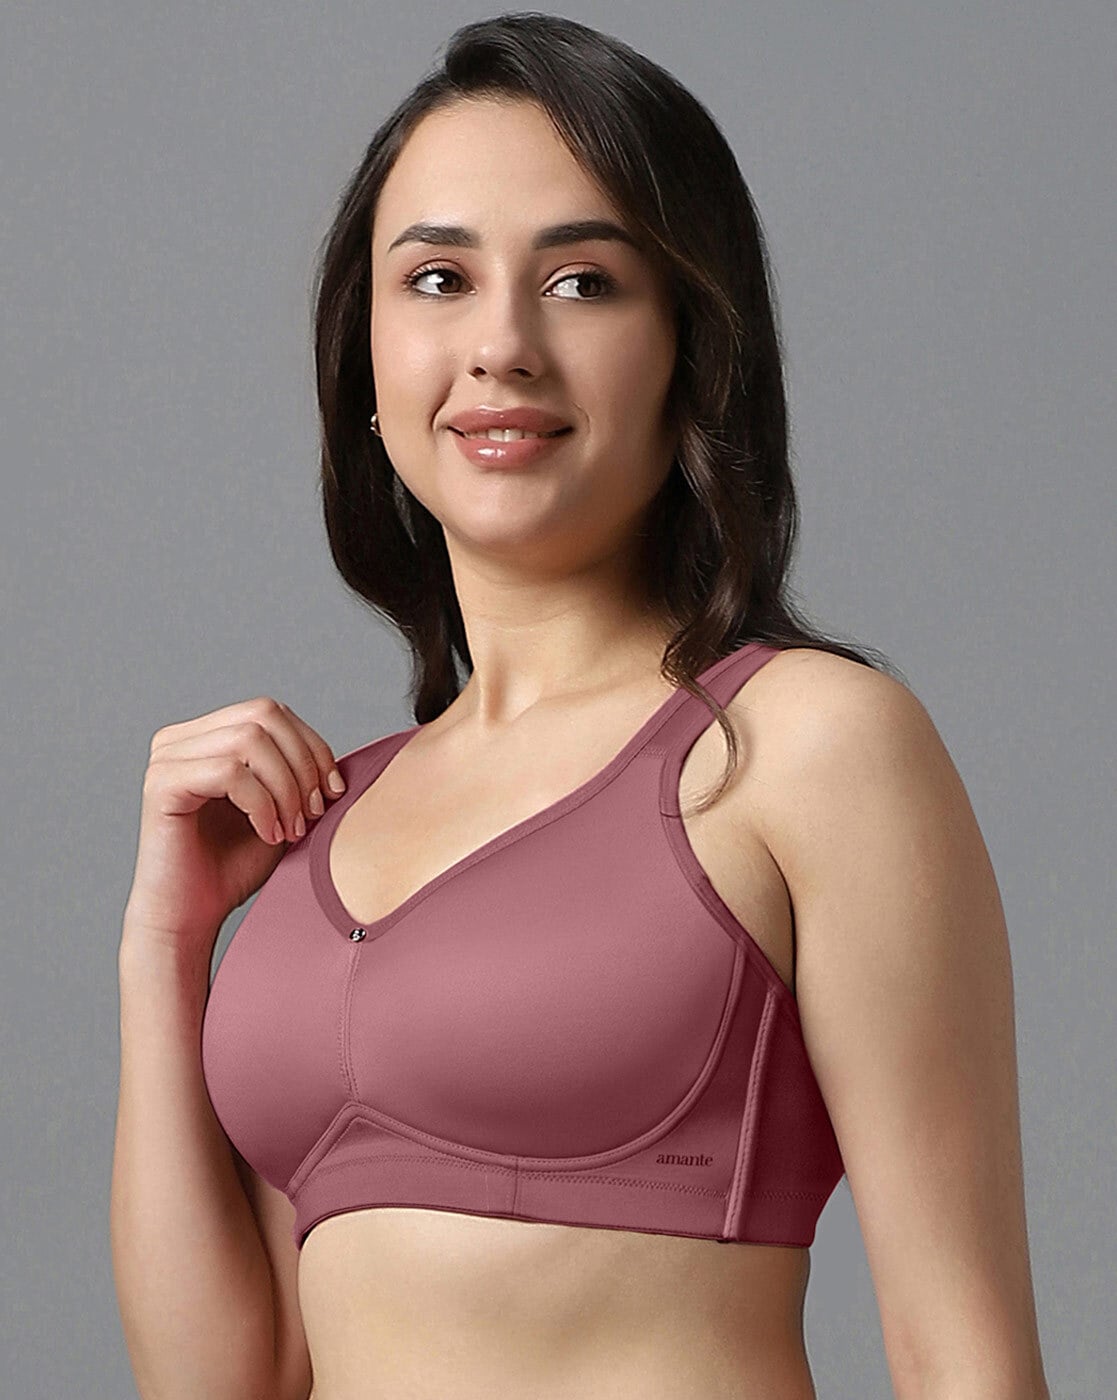 Amante 34C Peach Support Bra in Hyderabad - Dealers, Manufacturers &  Suppliers - Justdial